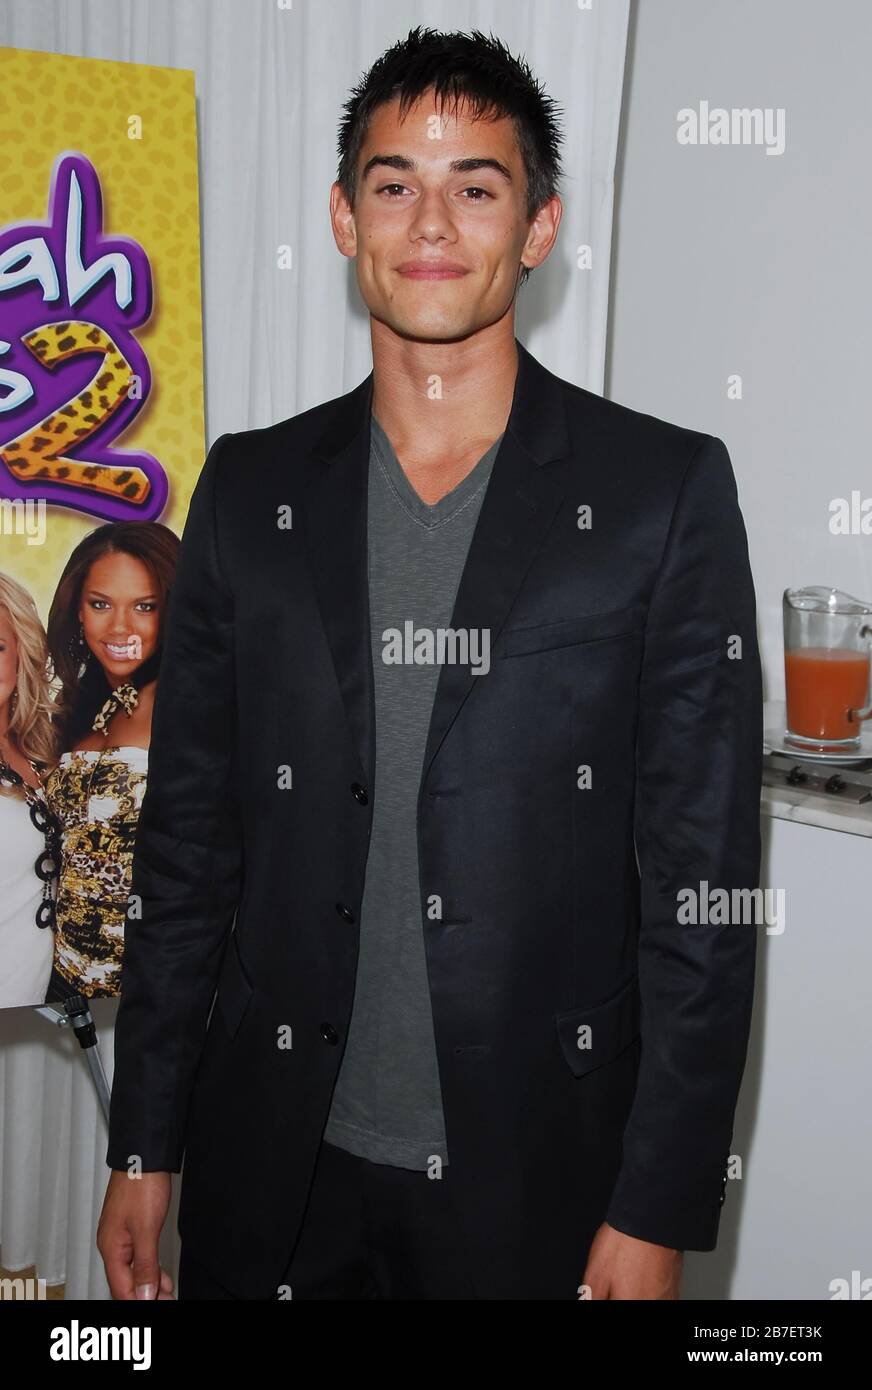 Golan Yosef at the Disney Channel's 'The Cheetah Girls 2' Photo Op held at The Mondrian Hotel - Gallery A in West Hollywood, CA. The event took place on Tuesday, August 1, 2006.  Photo by: SBM / PictureLux Stock Photo